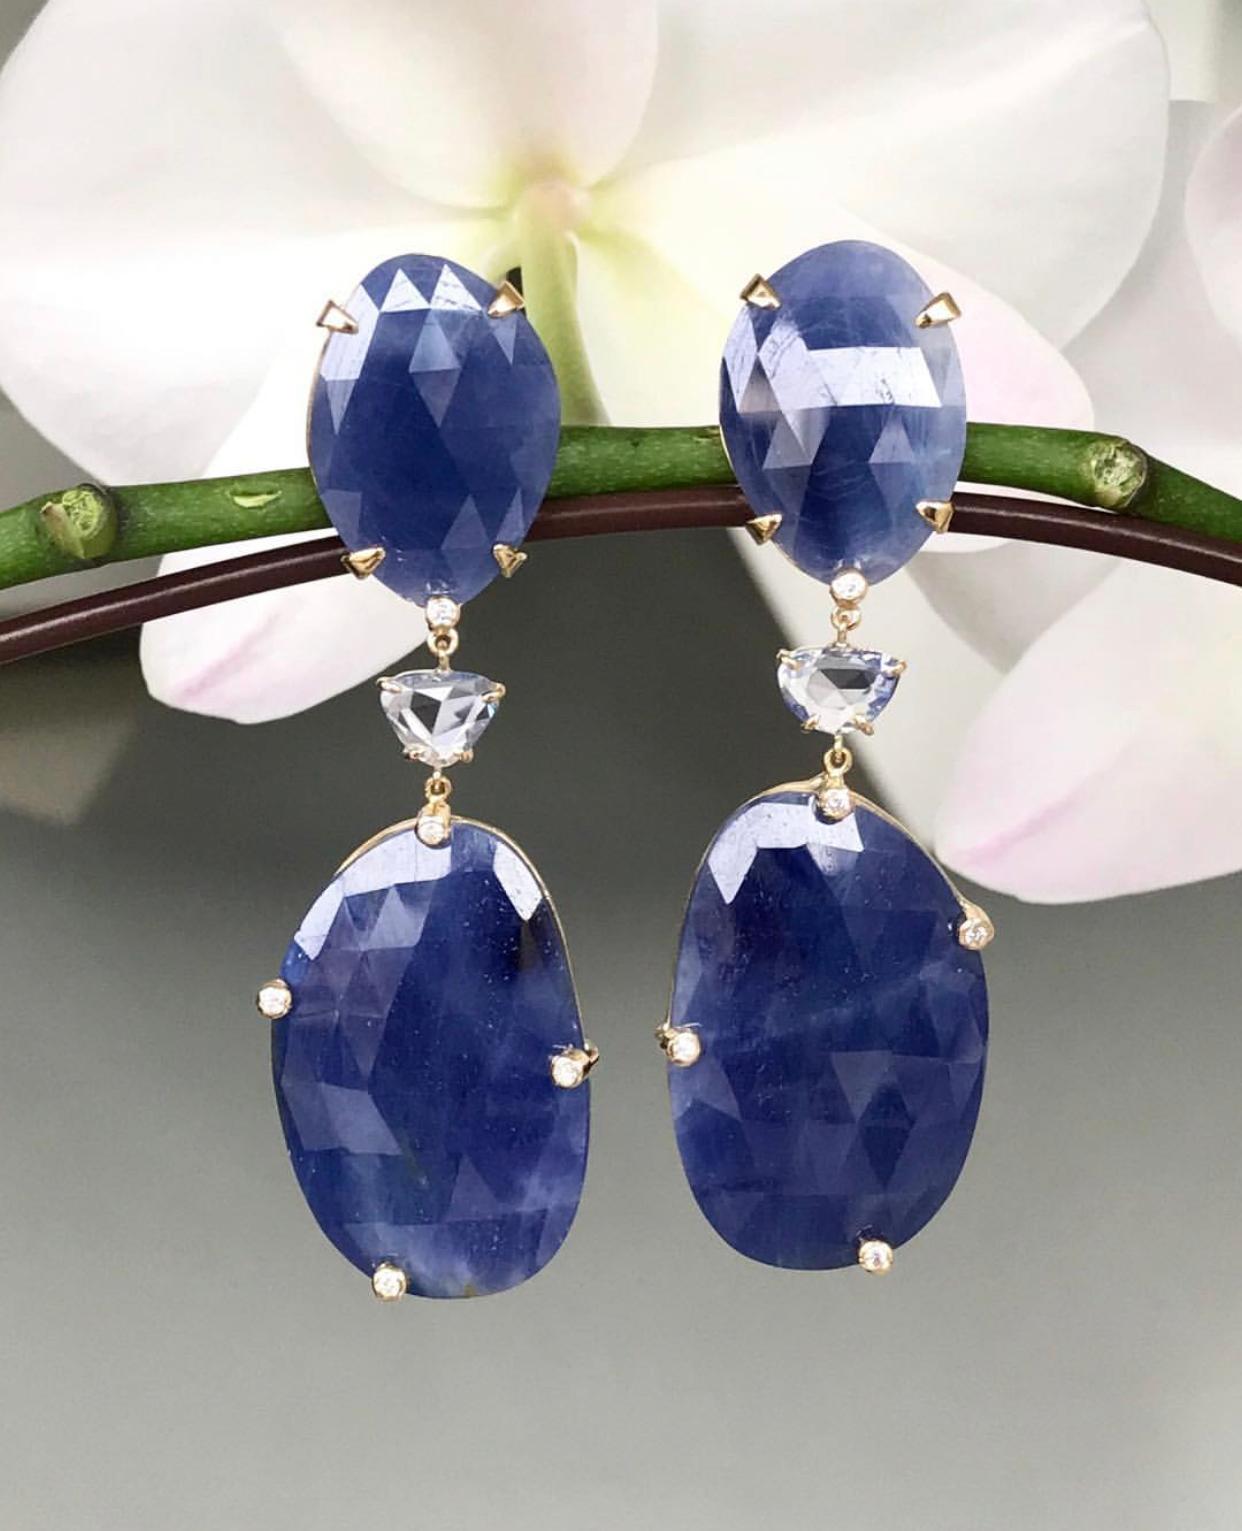 Rose cut blue sapphire statement earrings with diamond accents, handcrafted in 18 karat yellow gold. 2.83 inches or 72 mm length.

These elegant one-of-a-kind earrings can be dressed up with a lovely cocktail dress or dressed down and worn with a